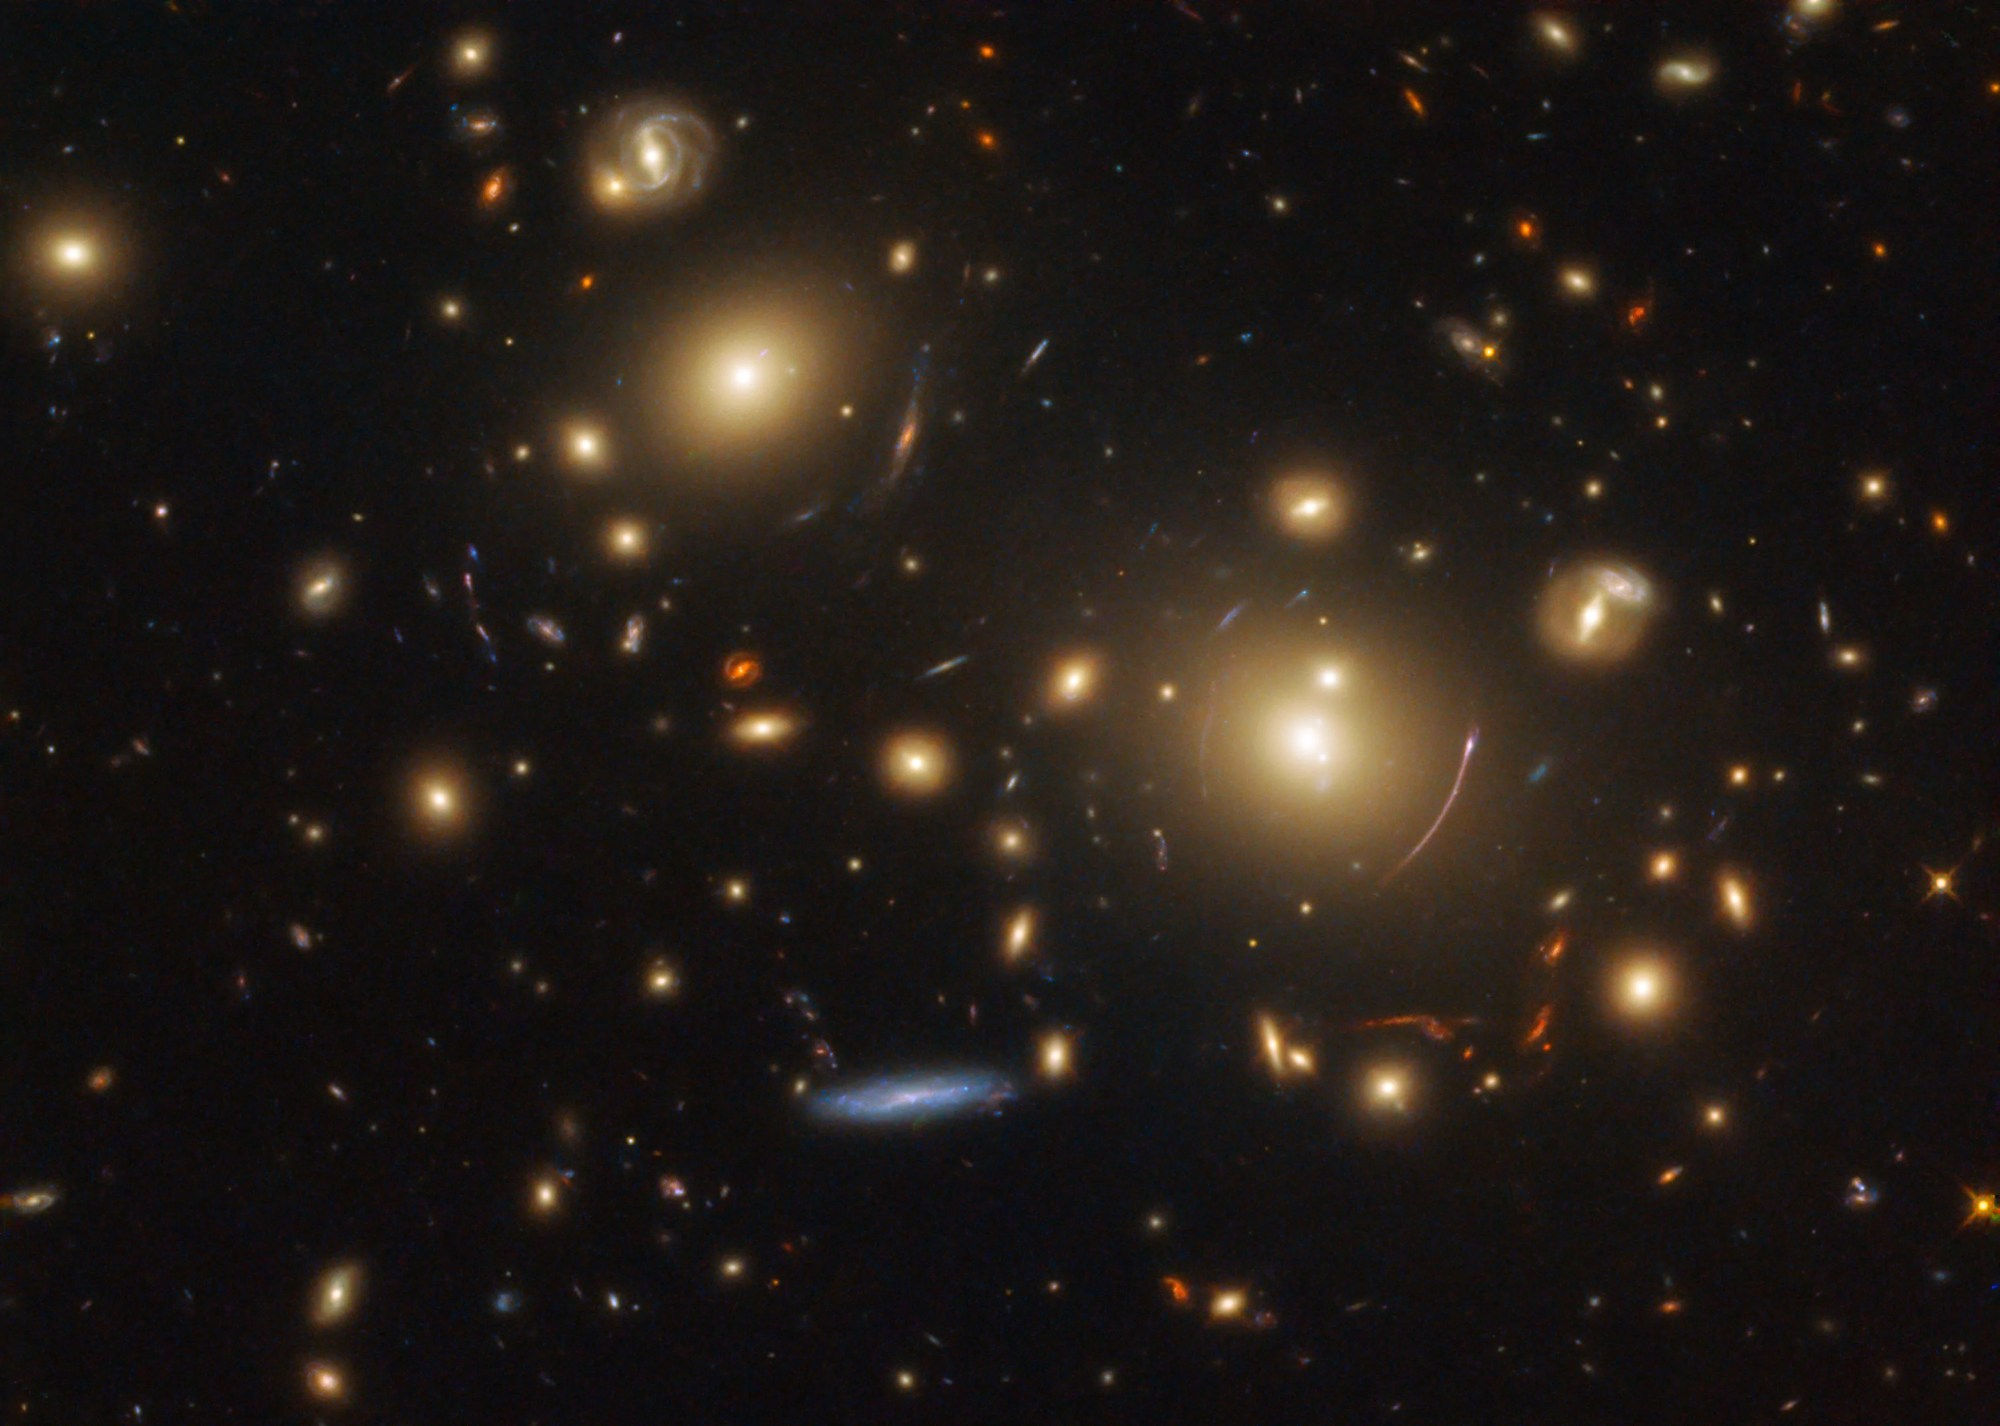 Cluster of amber and blue galaxies, some distorted